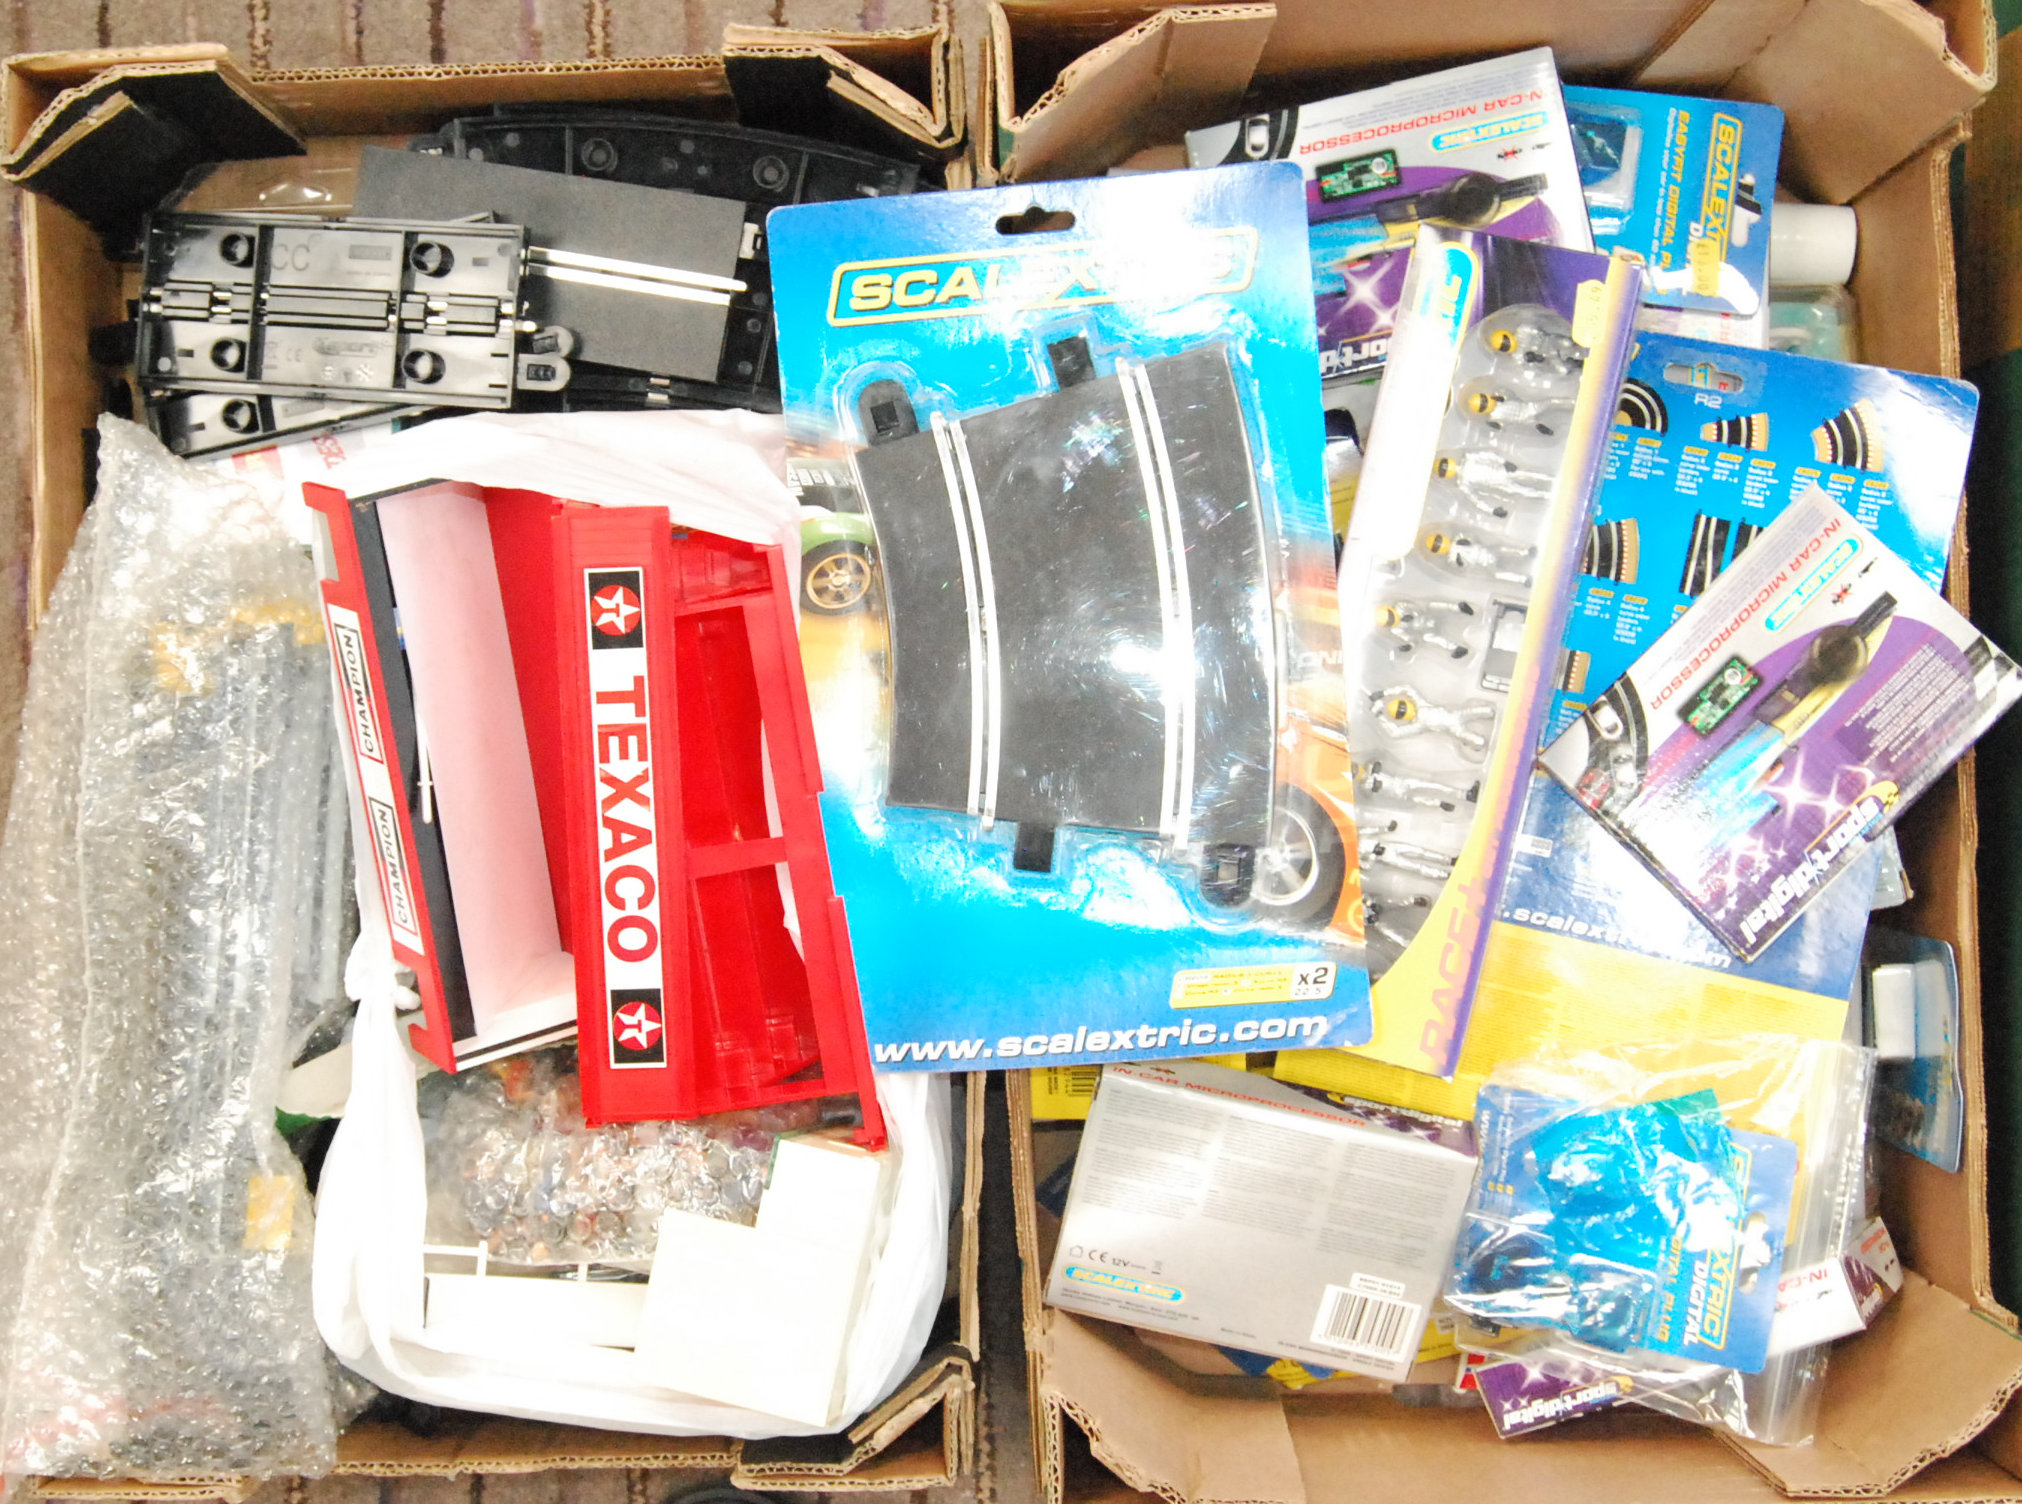 LARGE COLLECTION OF SCALEXTRIC SLOT RACING ACCESSORIES